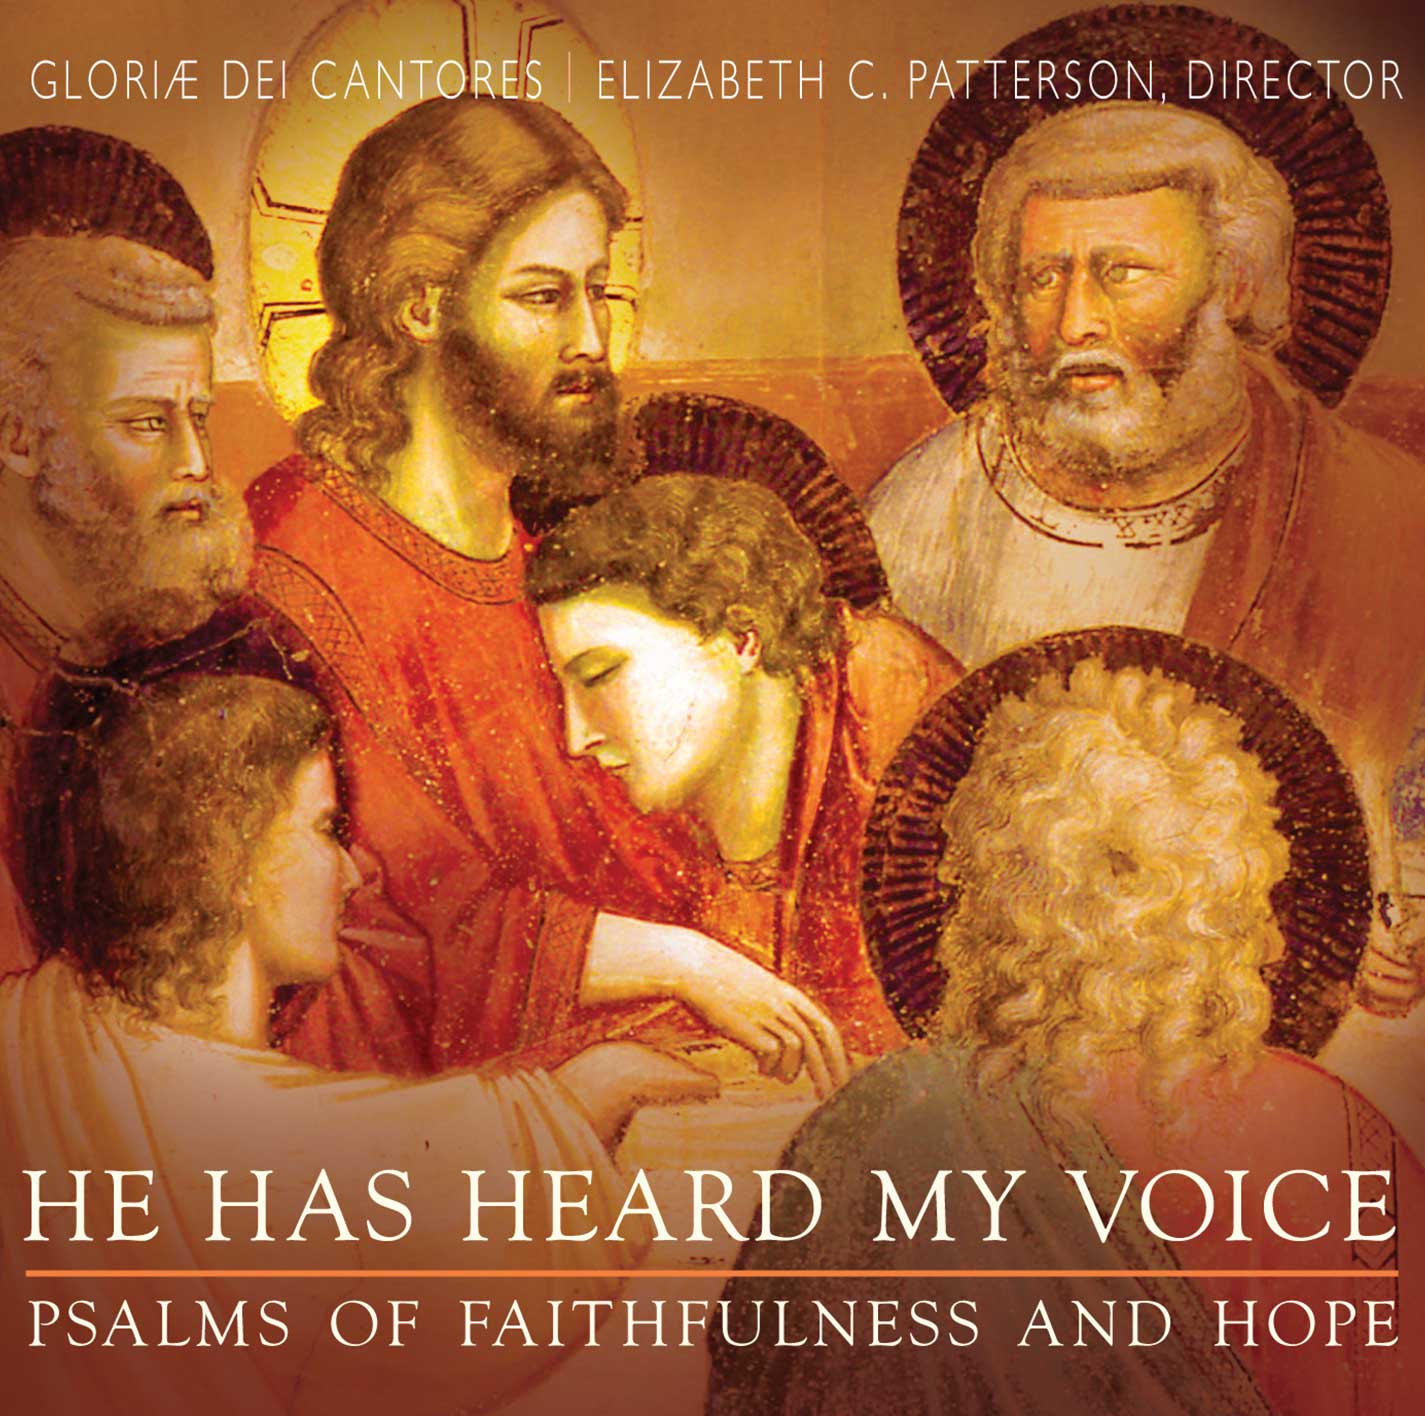 product image of 'He Has Heard My Voice' Gloriae Dei Cantores choral recording